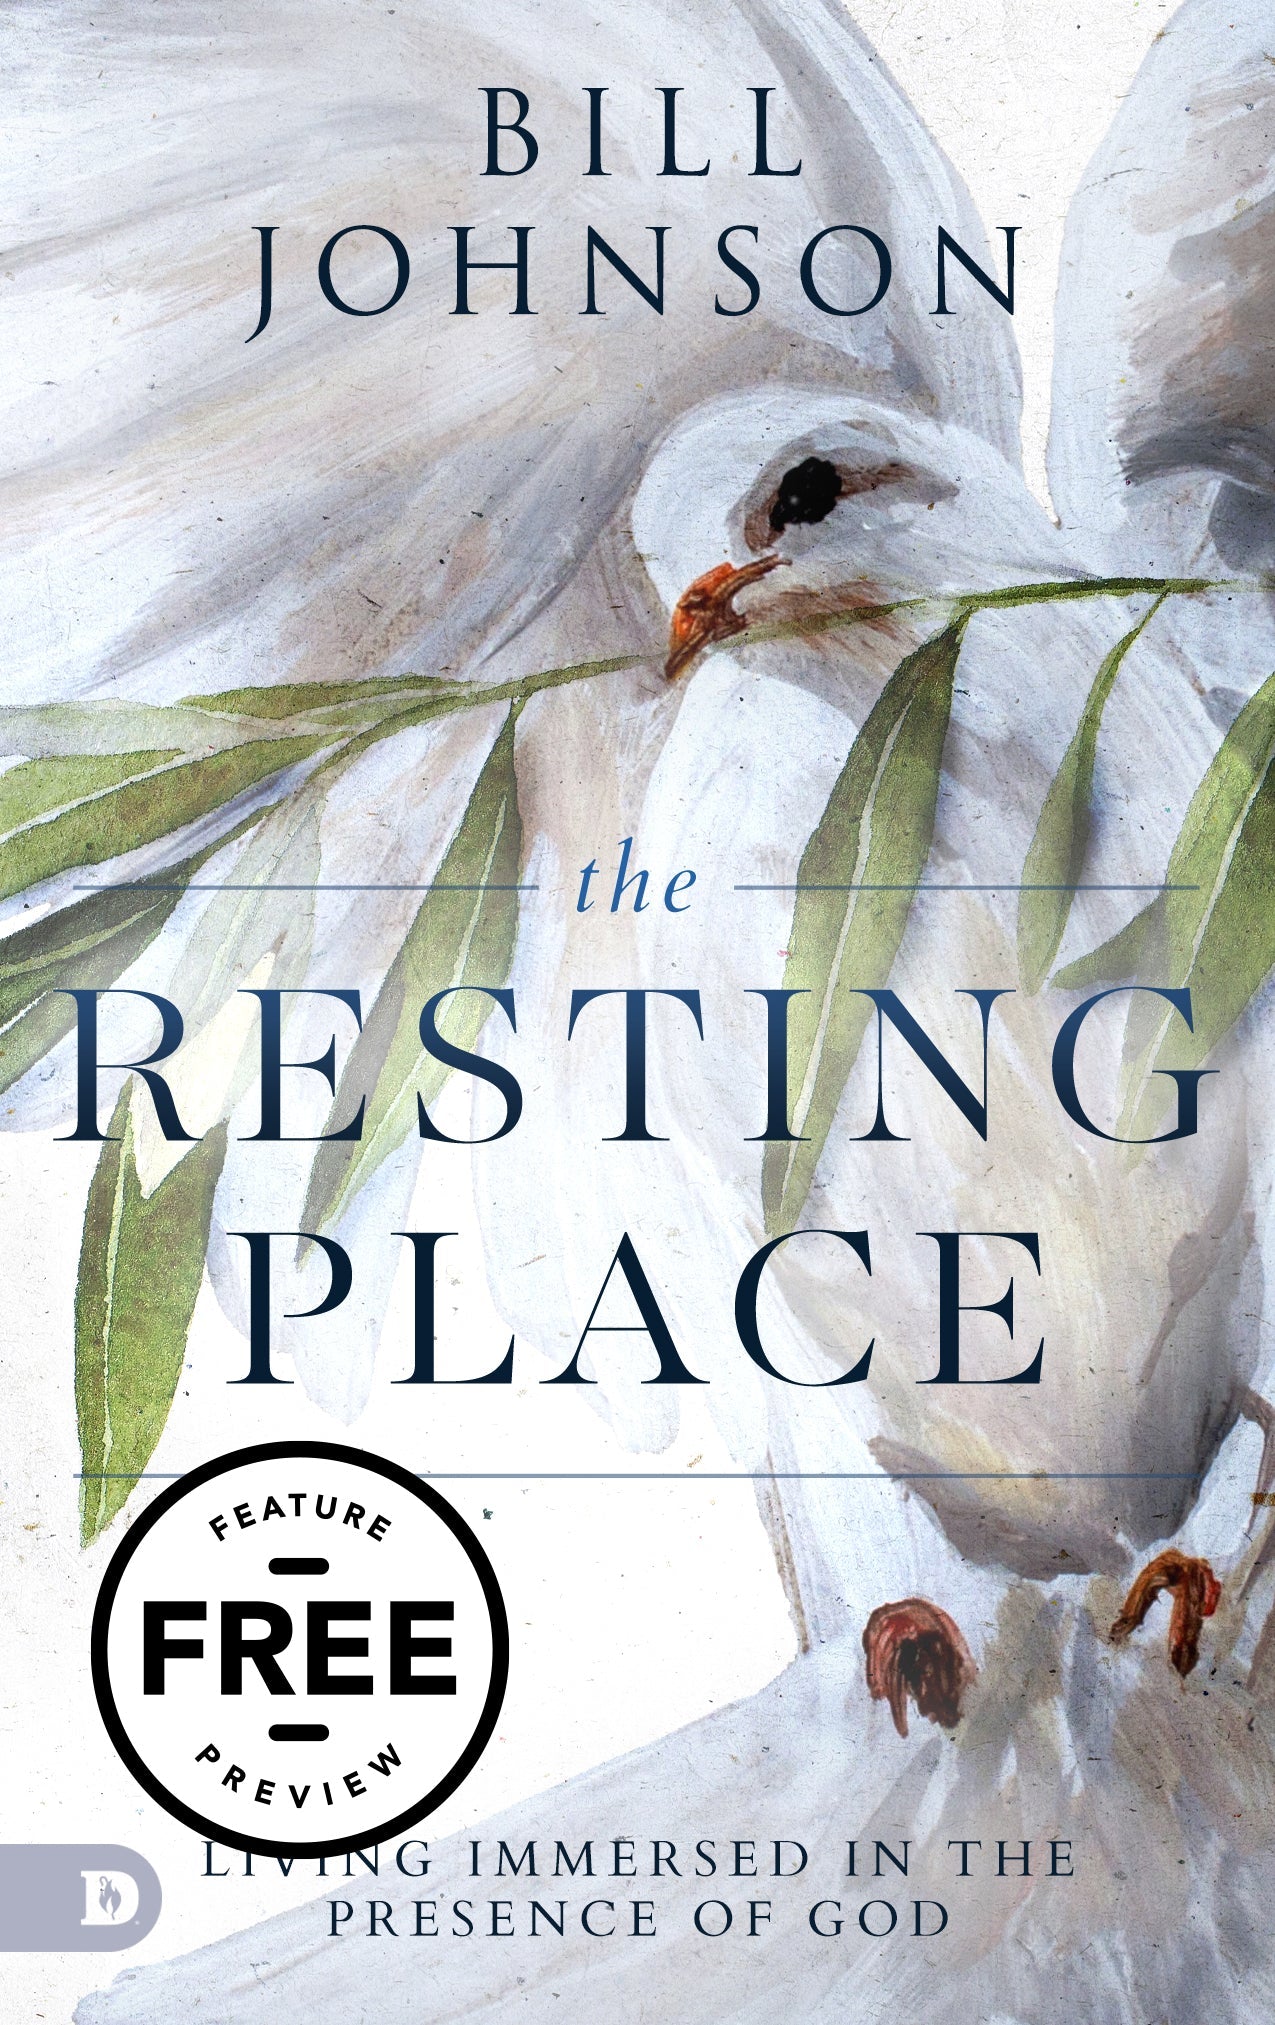 The Resting Place Free Feature Message (PDF Download)